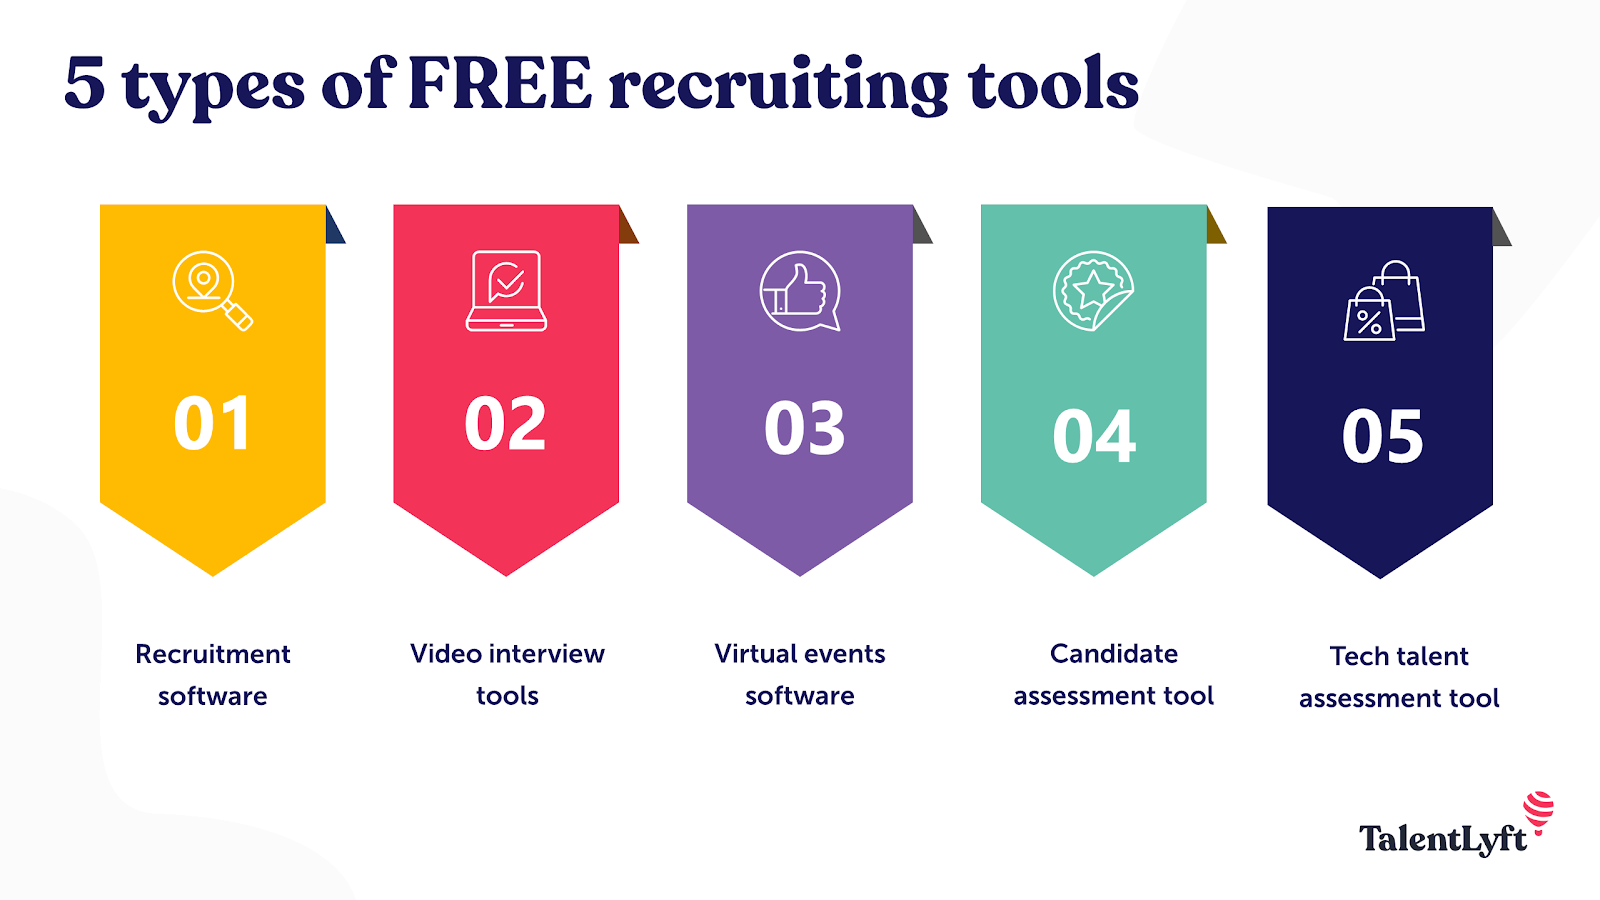 Free recruiting tools